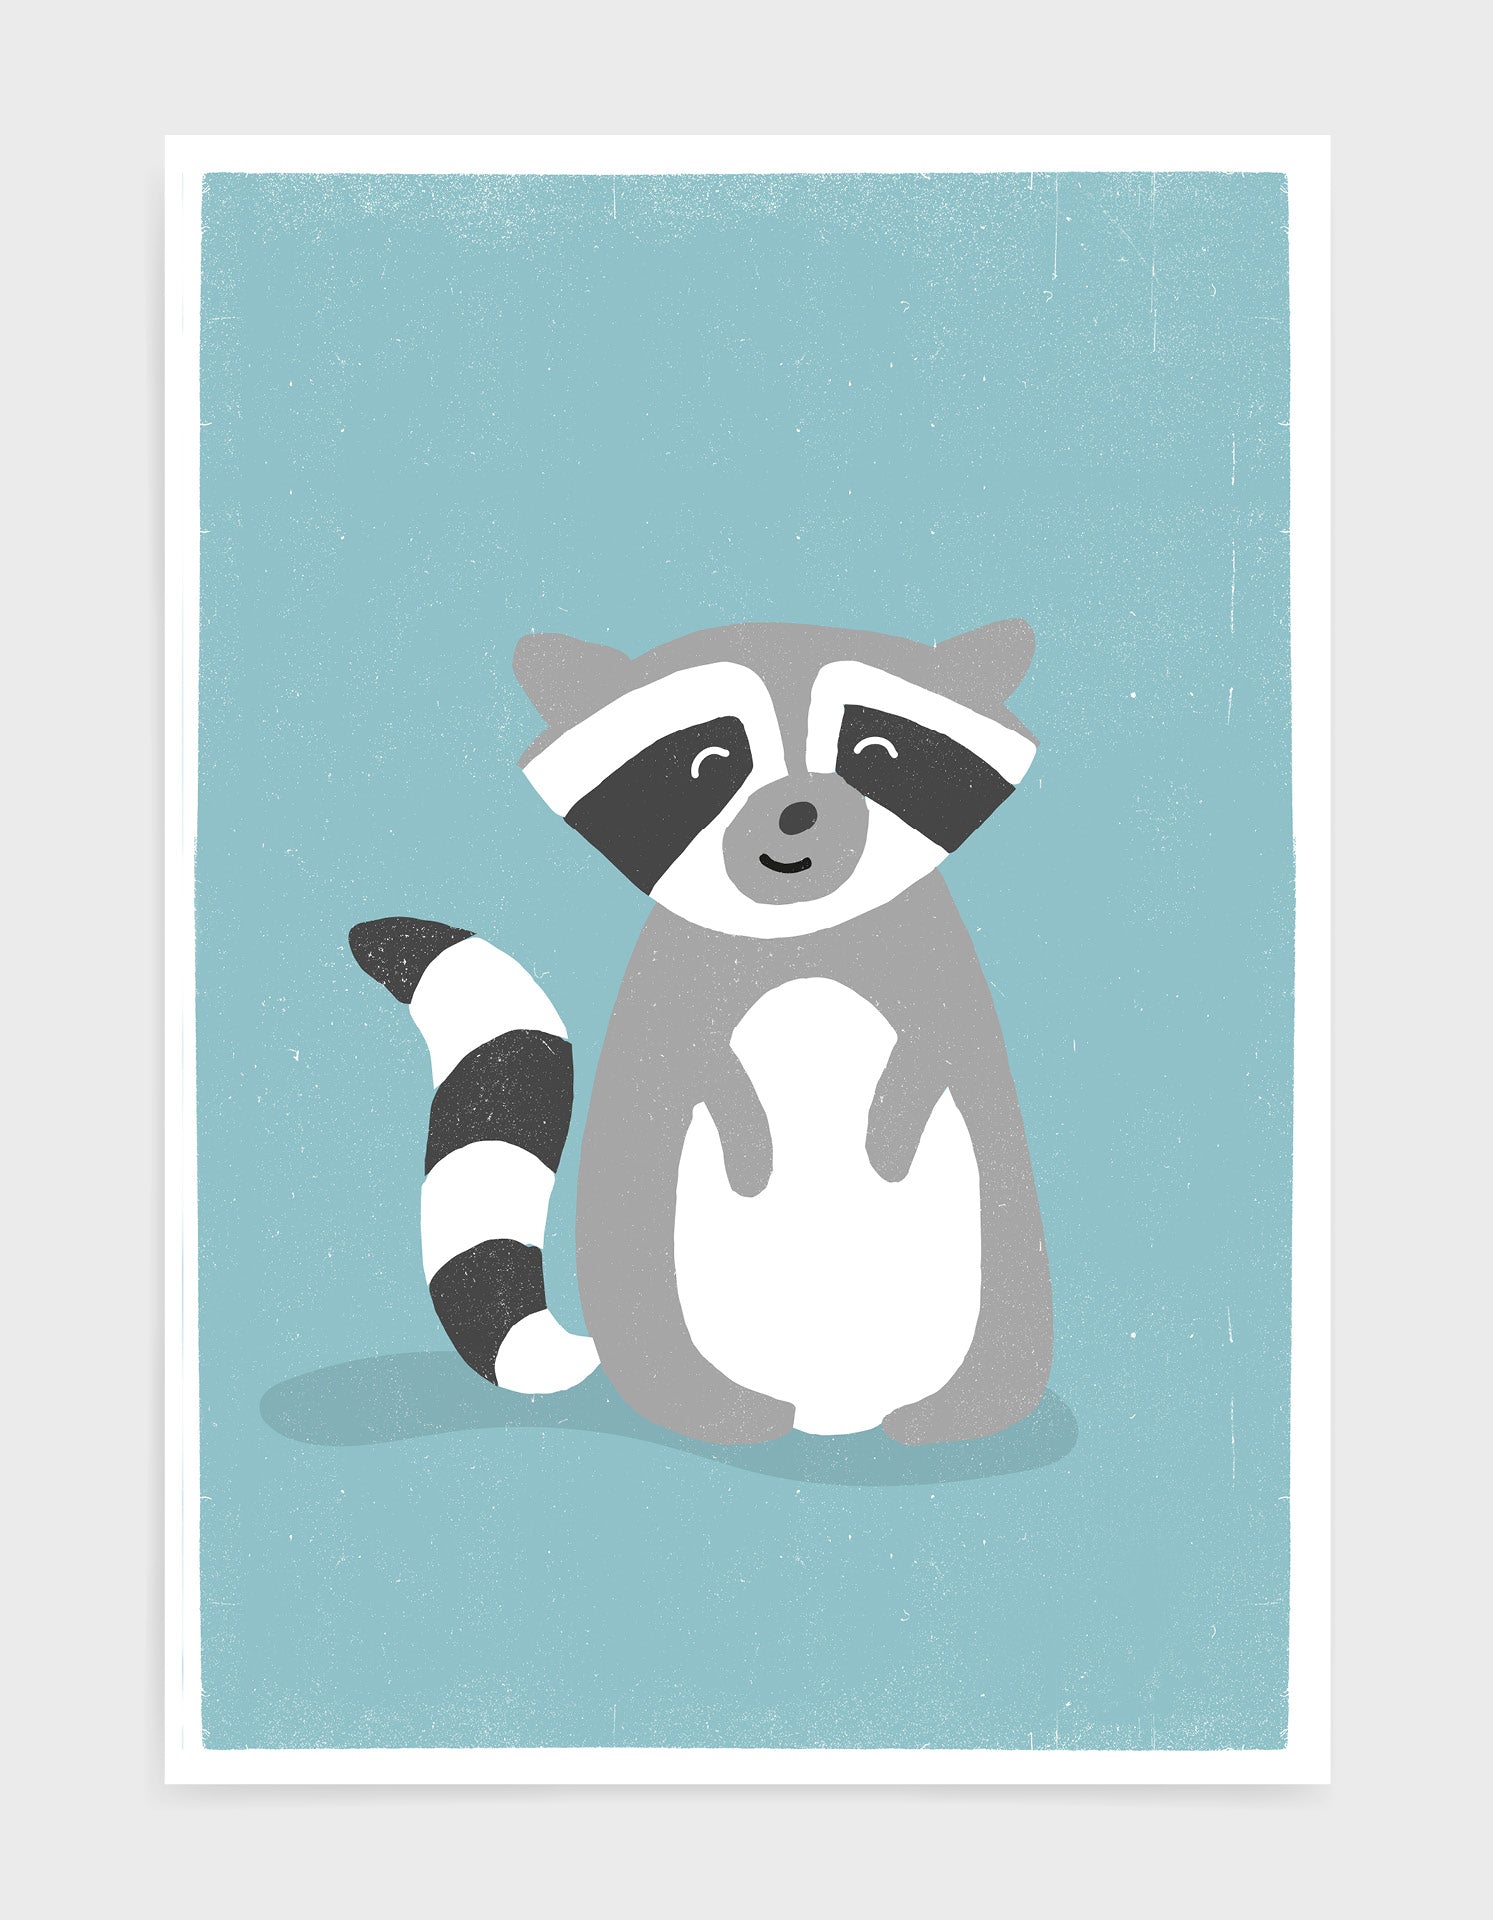 art print of a cute racoon on a light blue background 